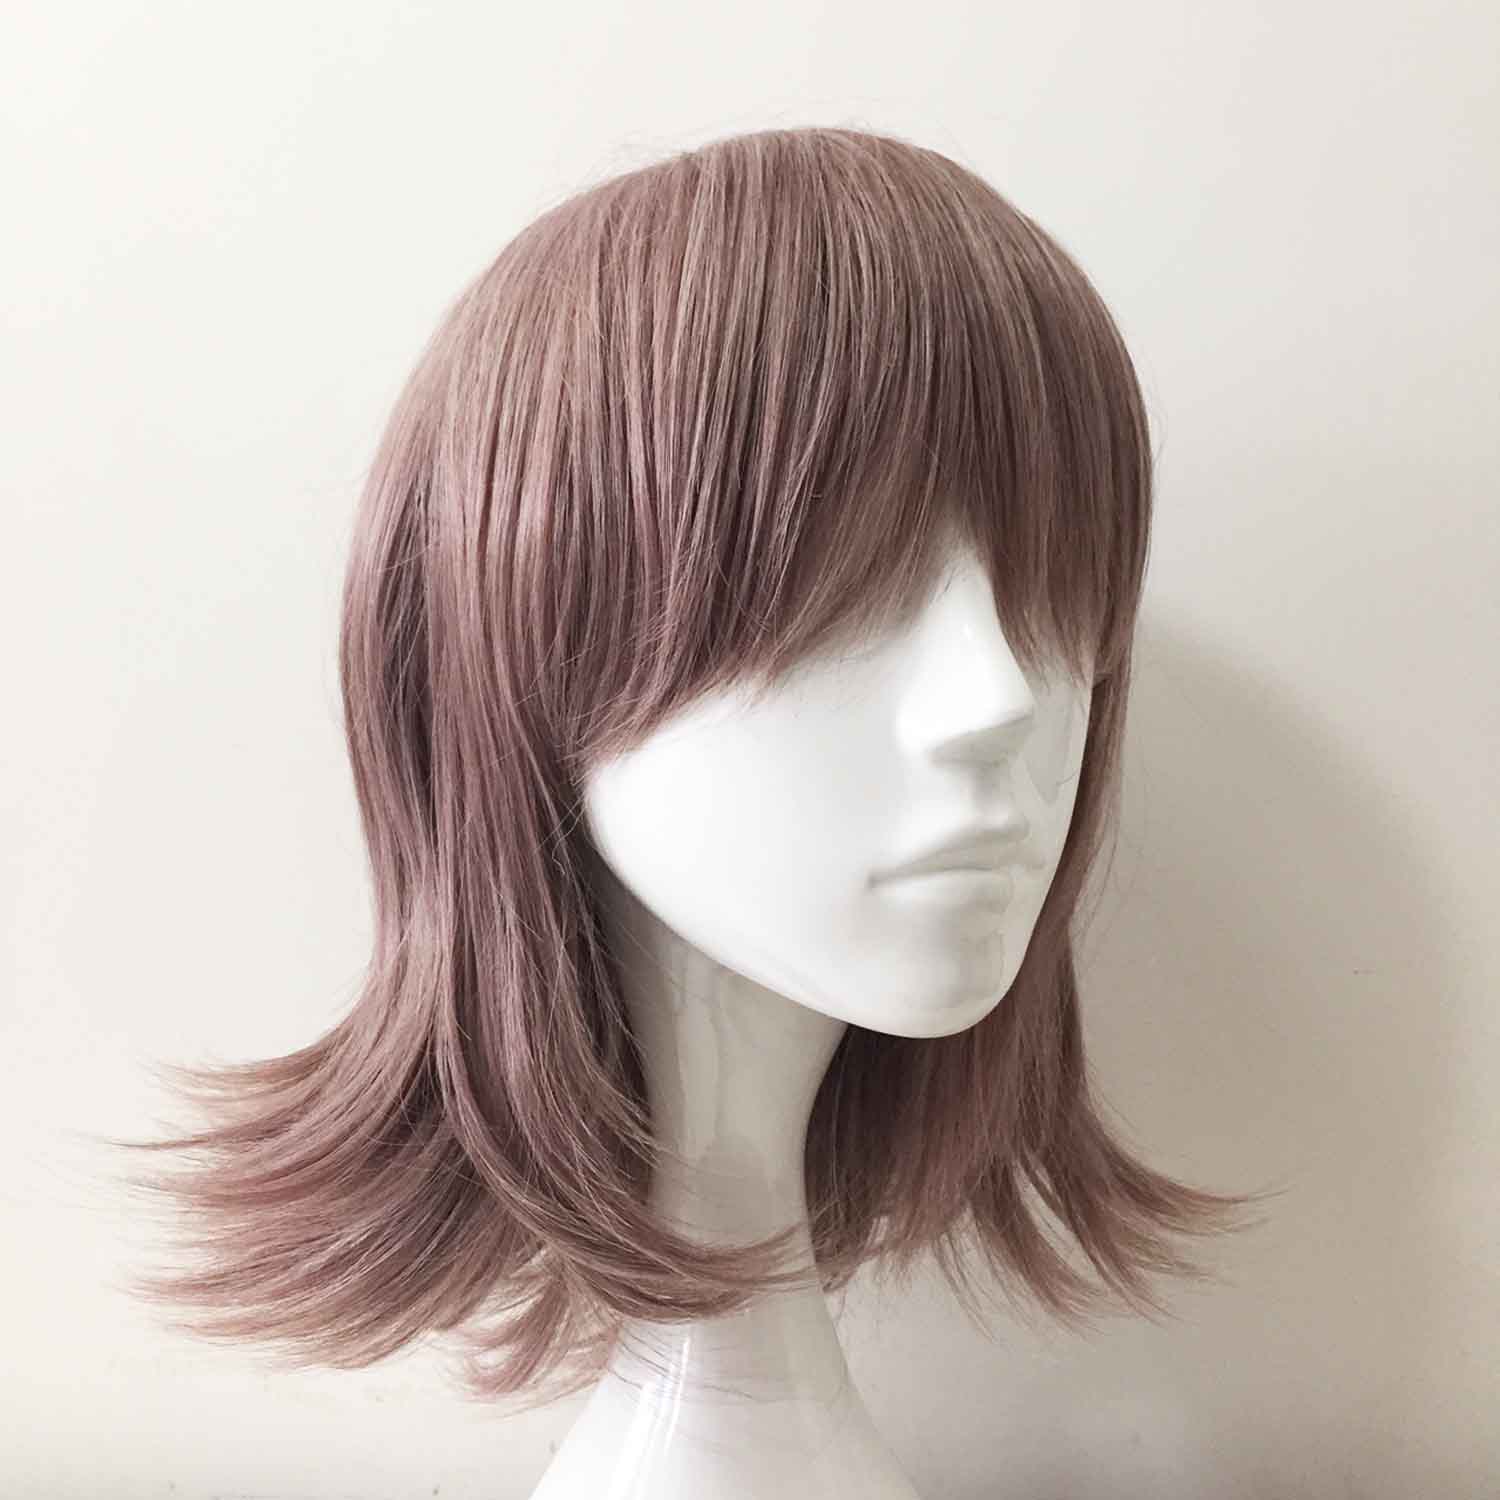 nevermindyrhead Women Dusty Pink Short Straight Fringe Bangs Flick Out Cosplay Wig